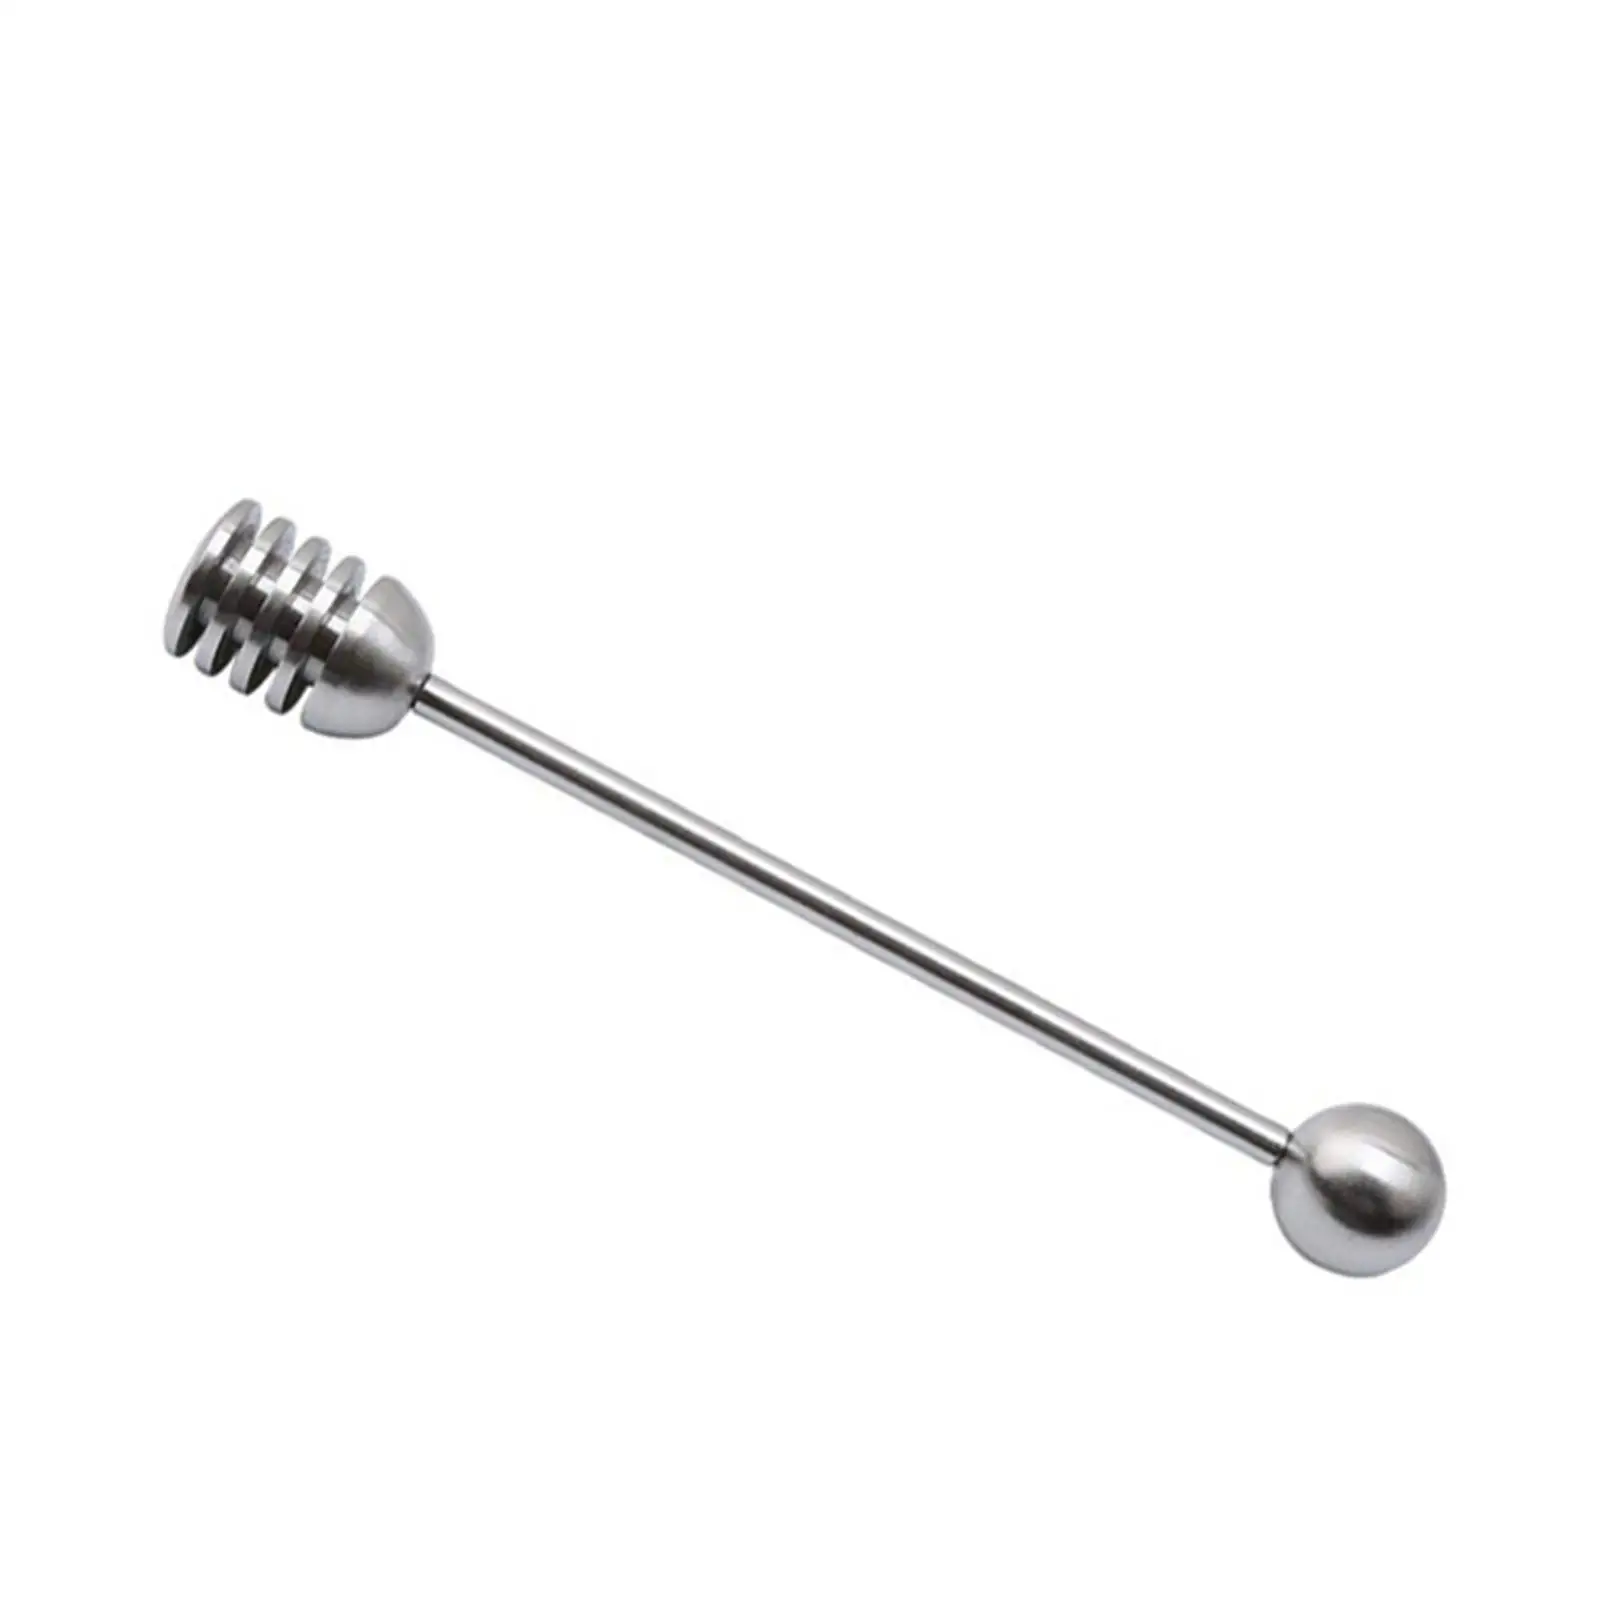 Solid Stainless Steel Honey Dipper Rod kitchen Gadgets Length 16cm Wear